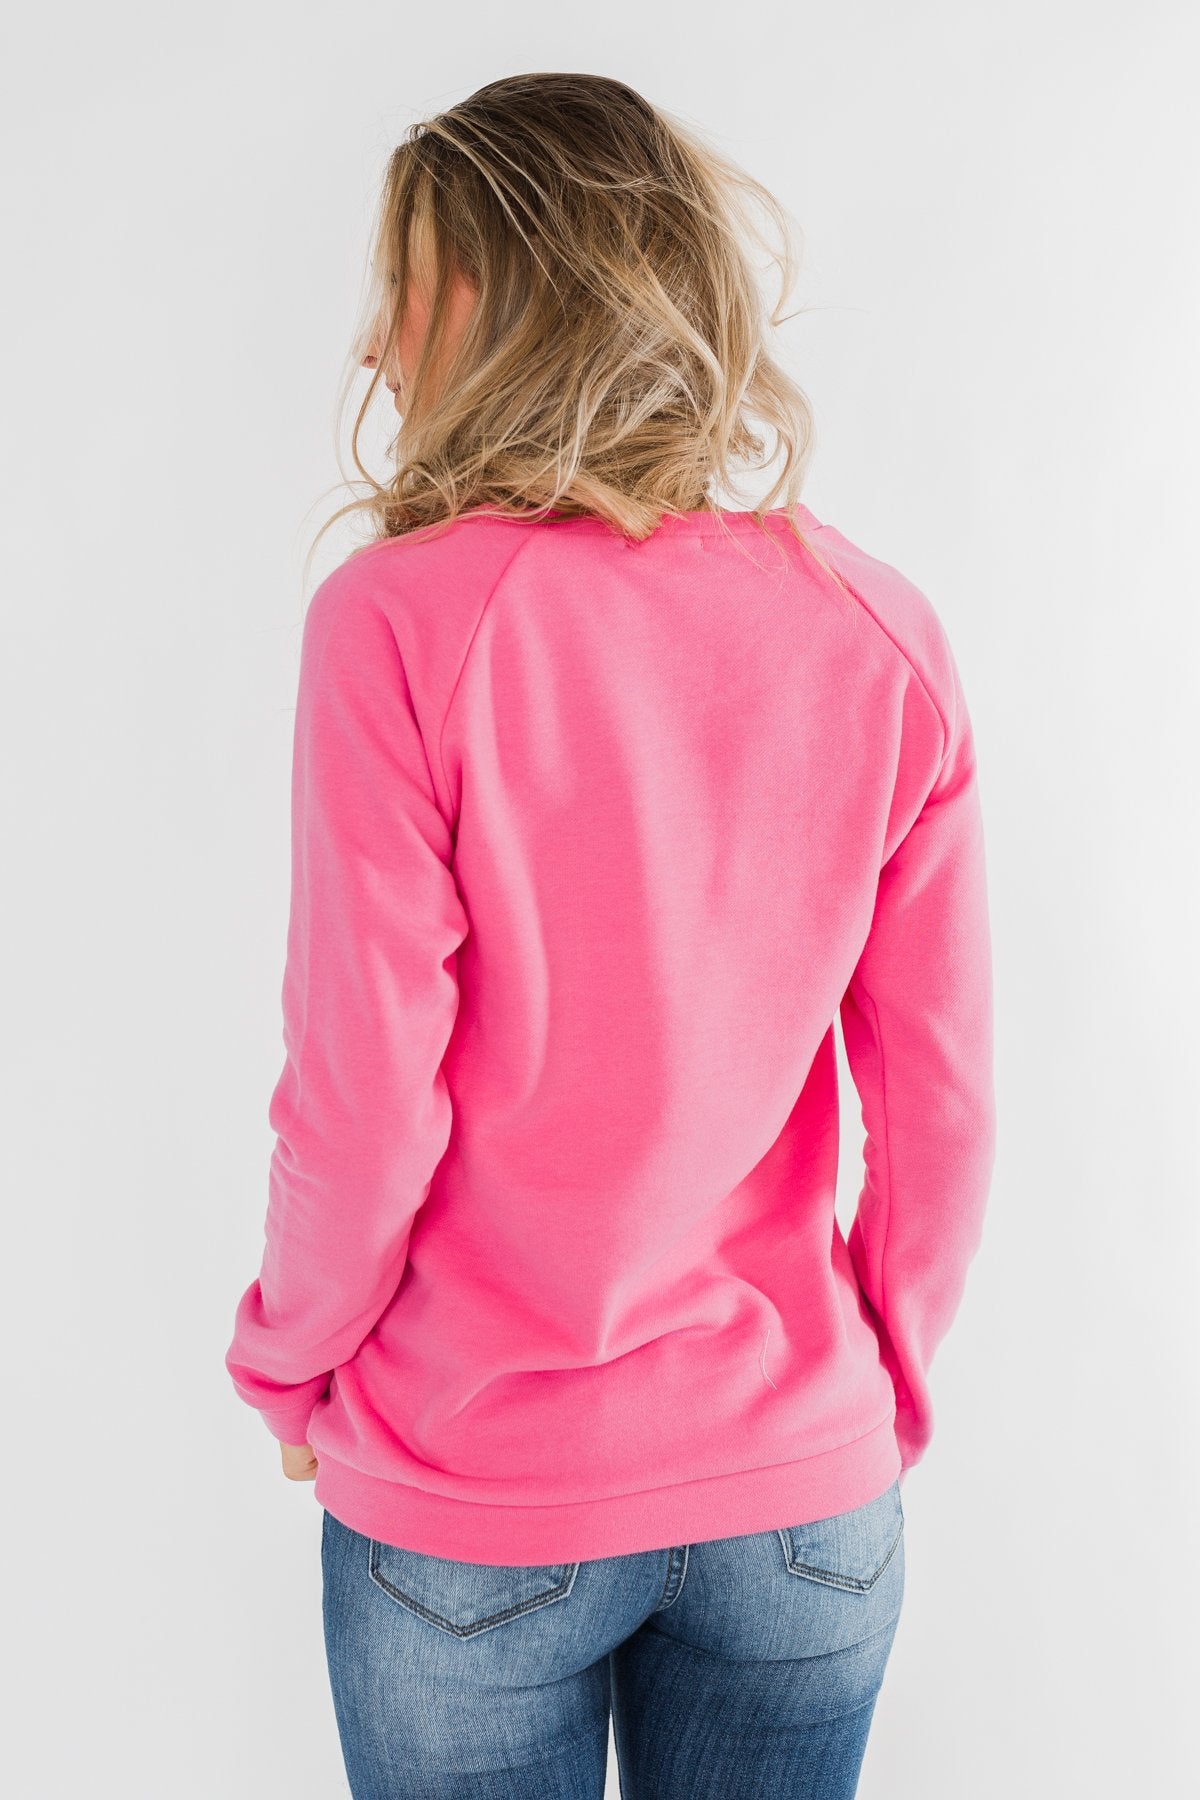 Pulse Exclusive Striped Floral Pullover- Pink & Navy